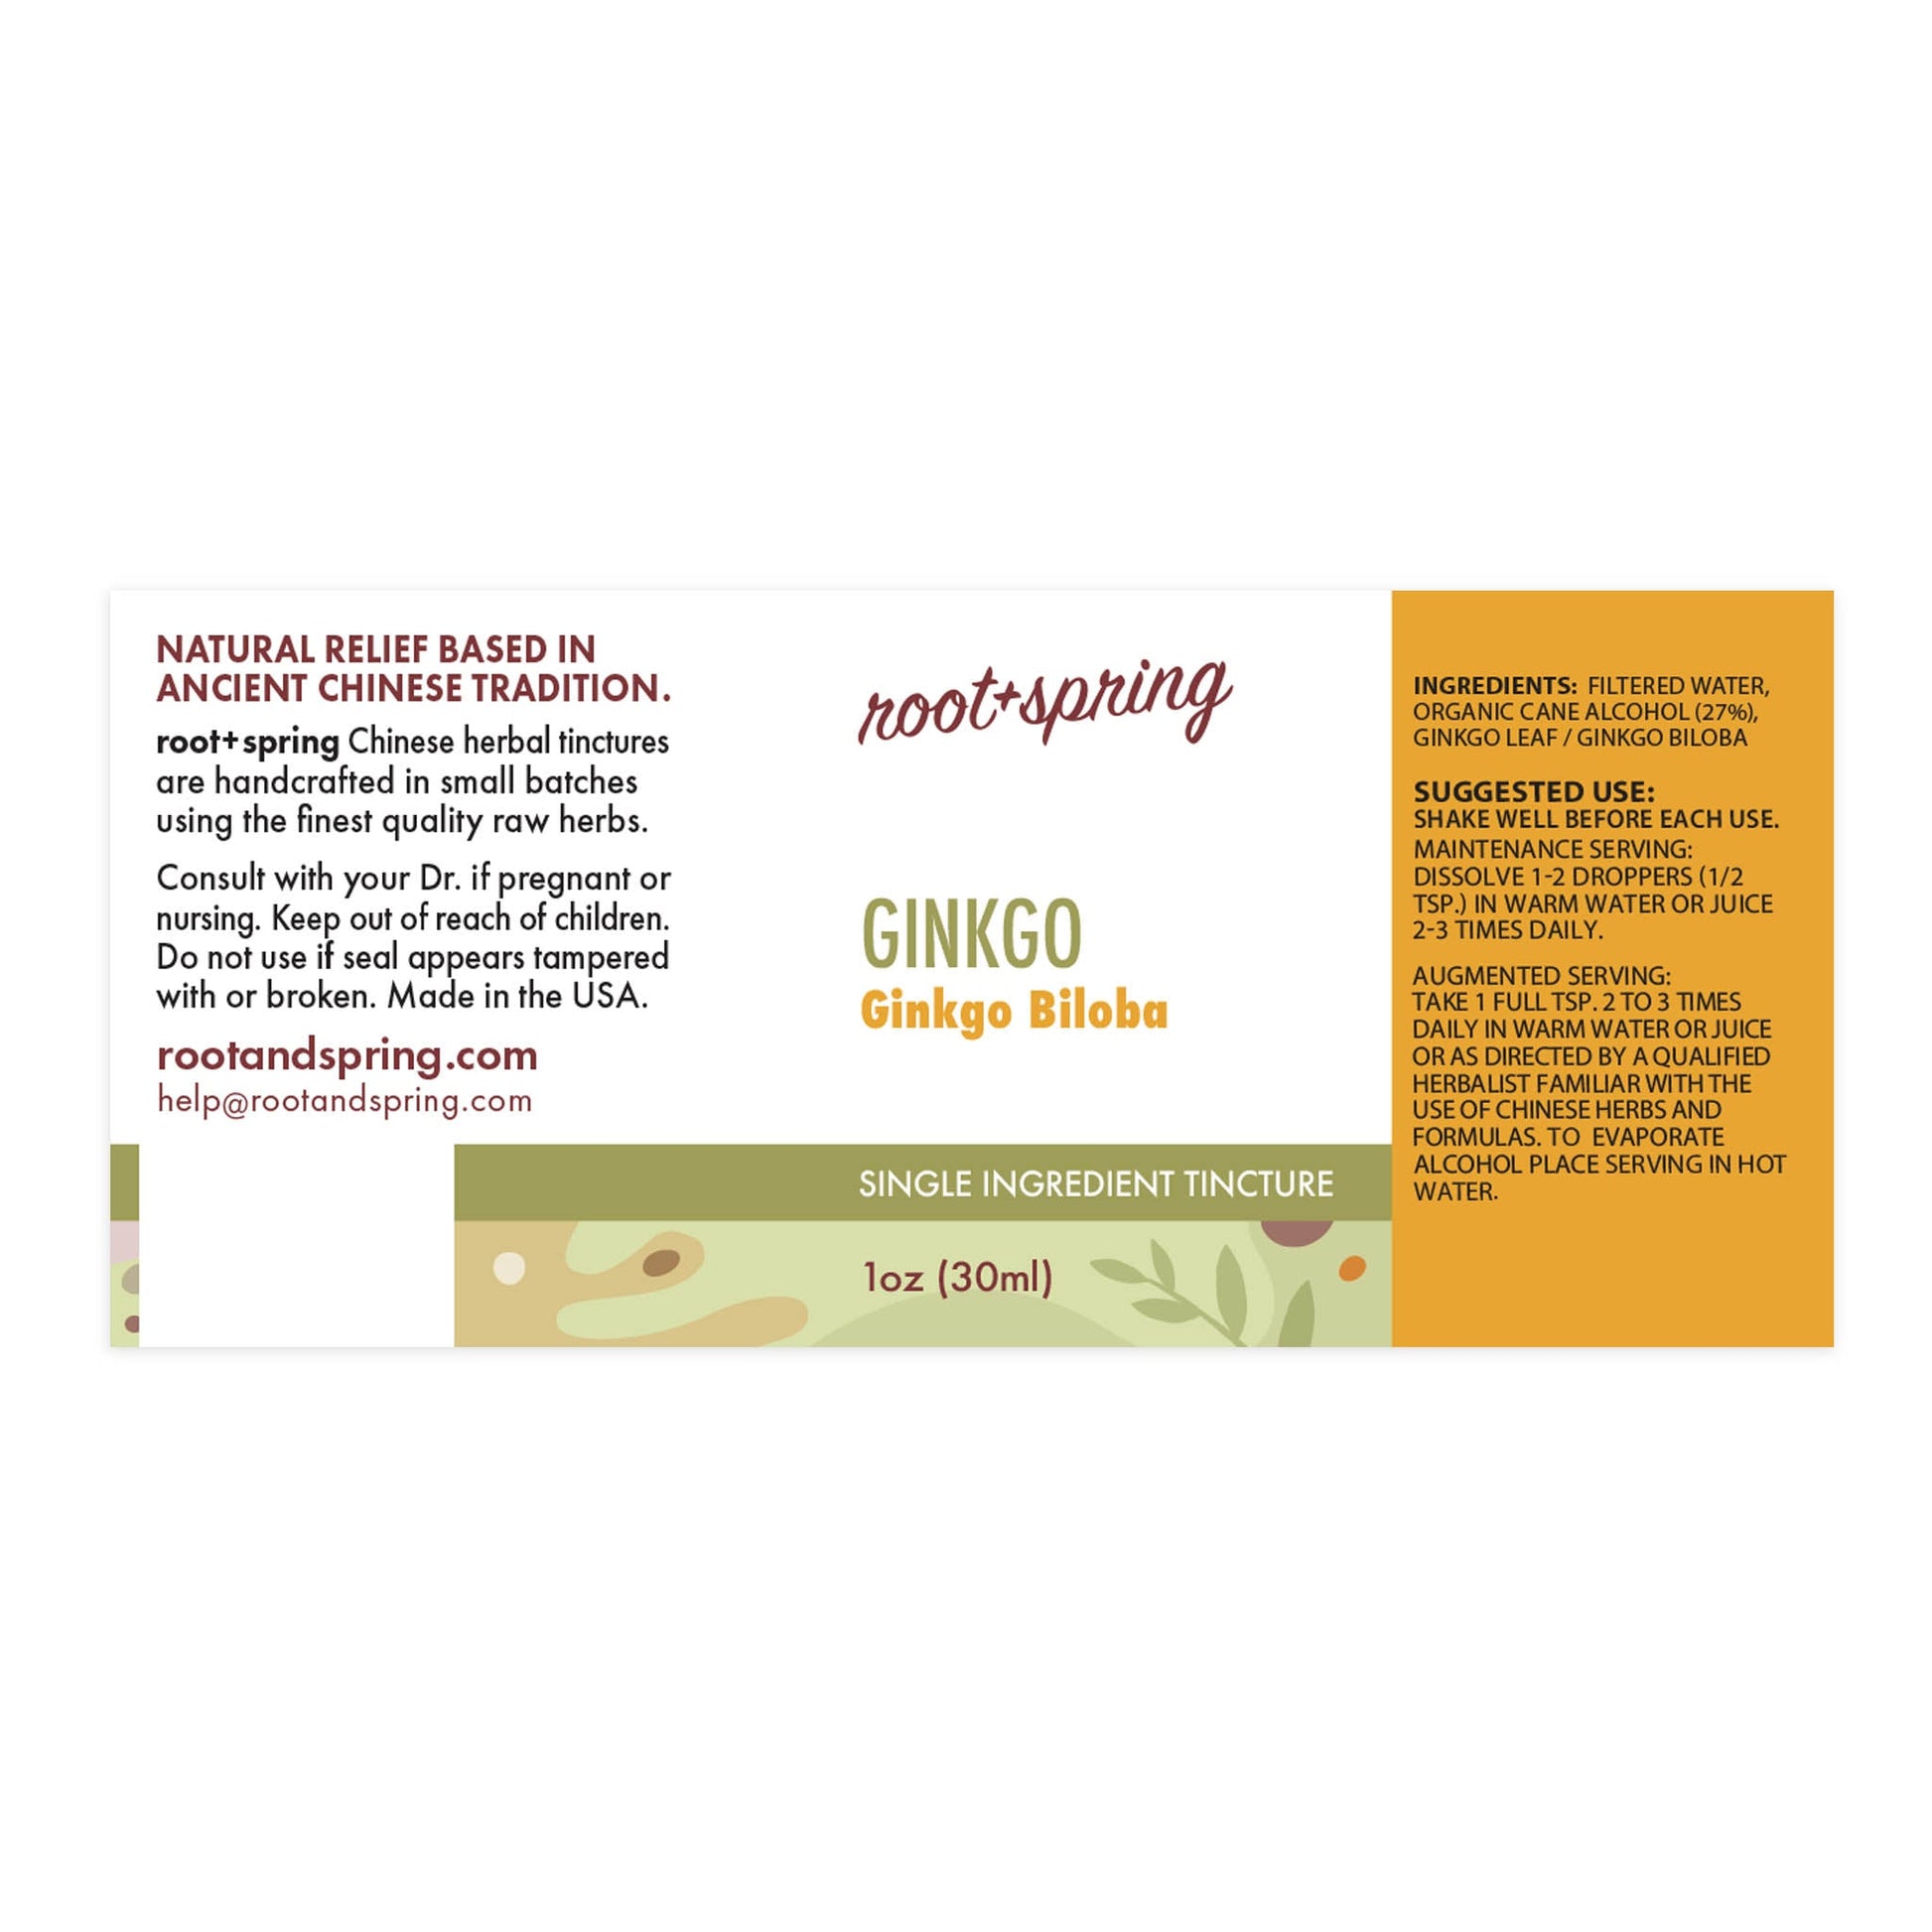 Label of Ginkgo (Ginkgo Biloba) - Herbal Tincture by root + spring